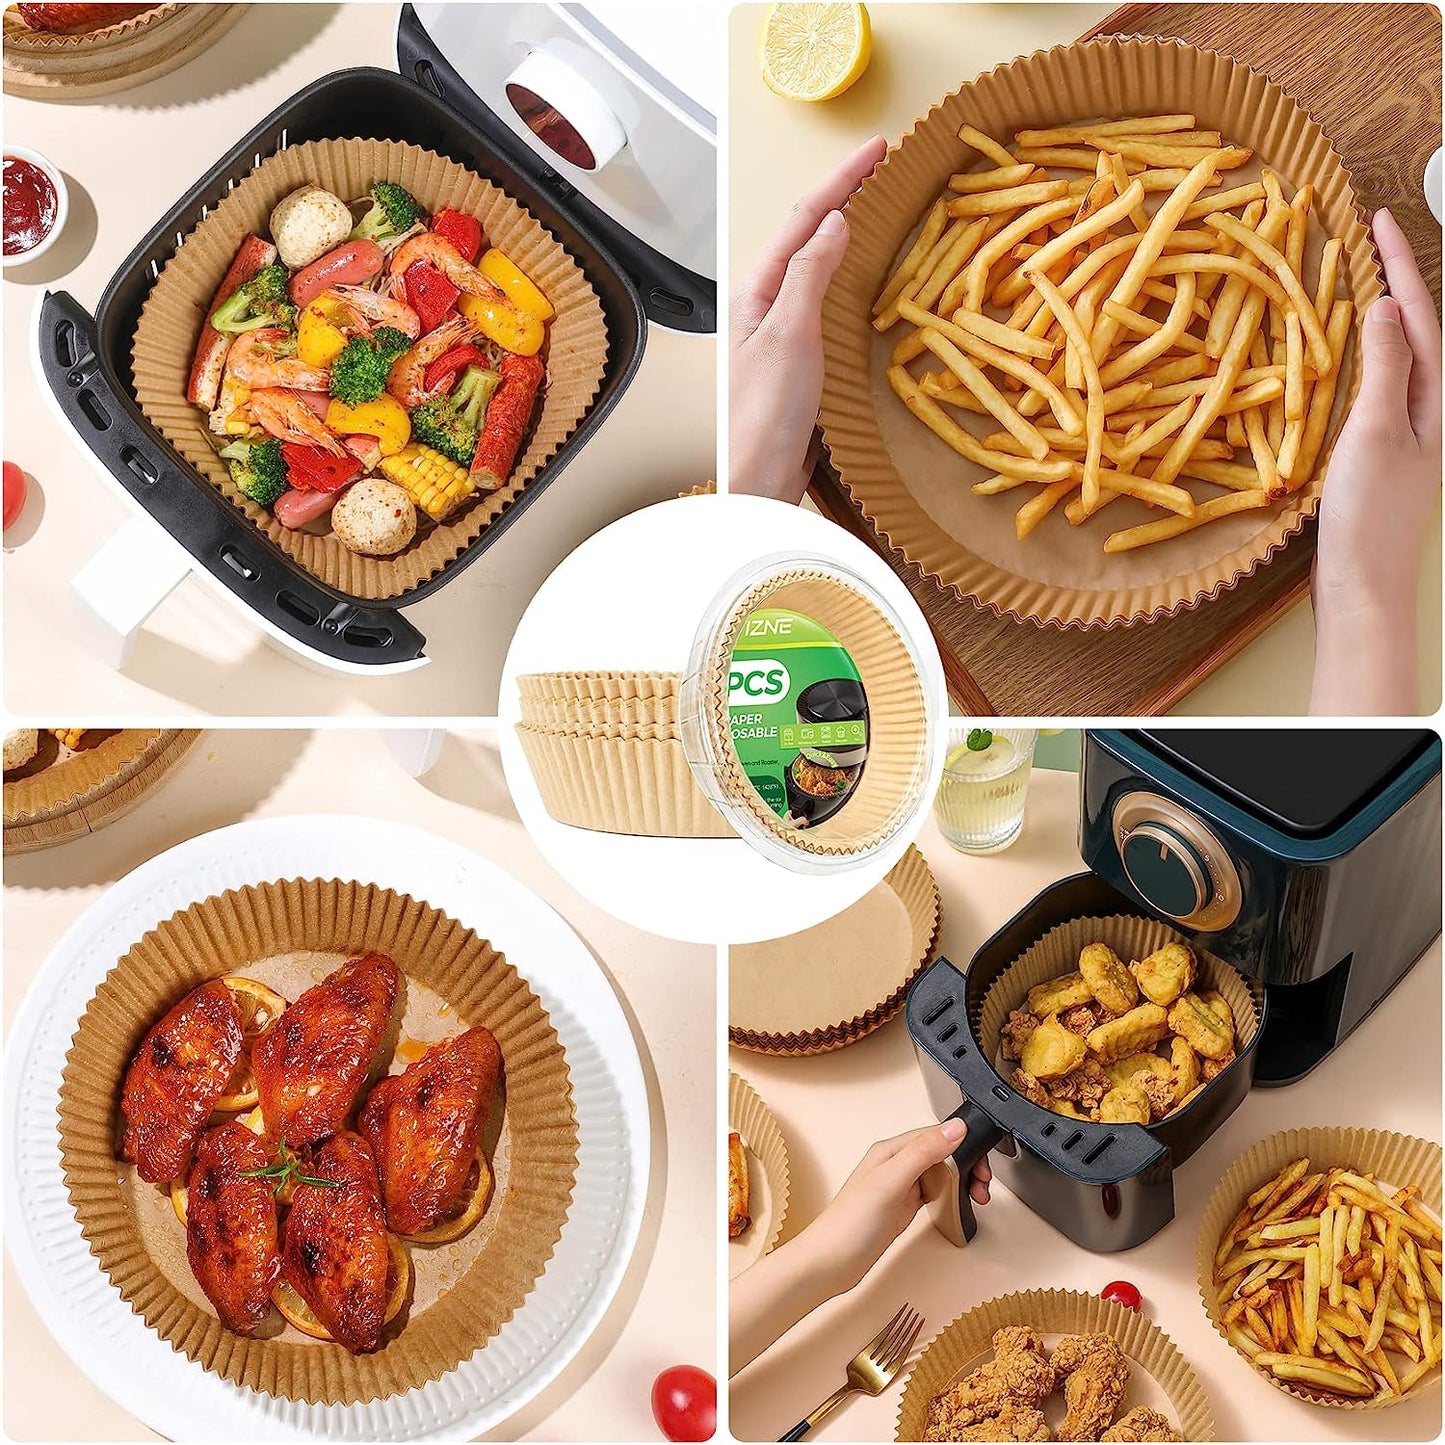 Air Fryer Paper Liners Disposable: 100PCS Round Airfryer Oven Insert Parchment Sheets Grease and Water Proof Non Stick Basket Liners for Baking Cooking.